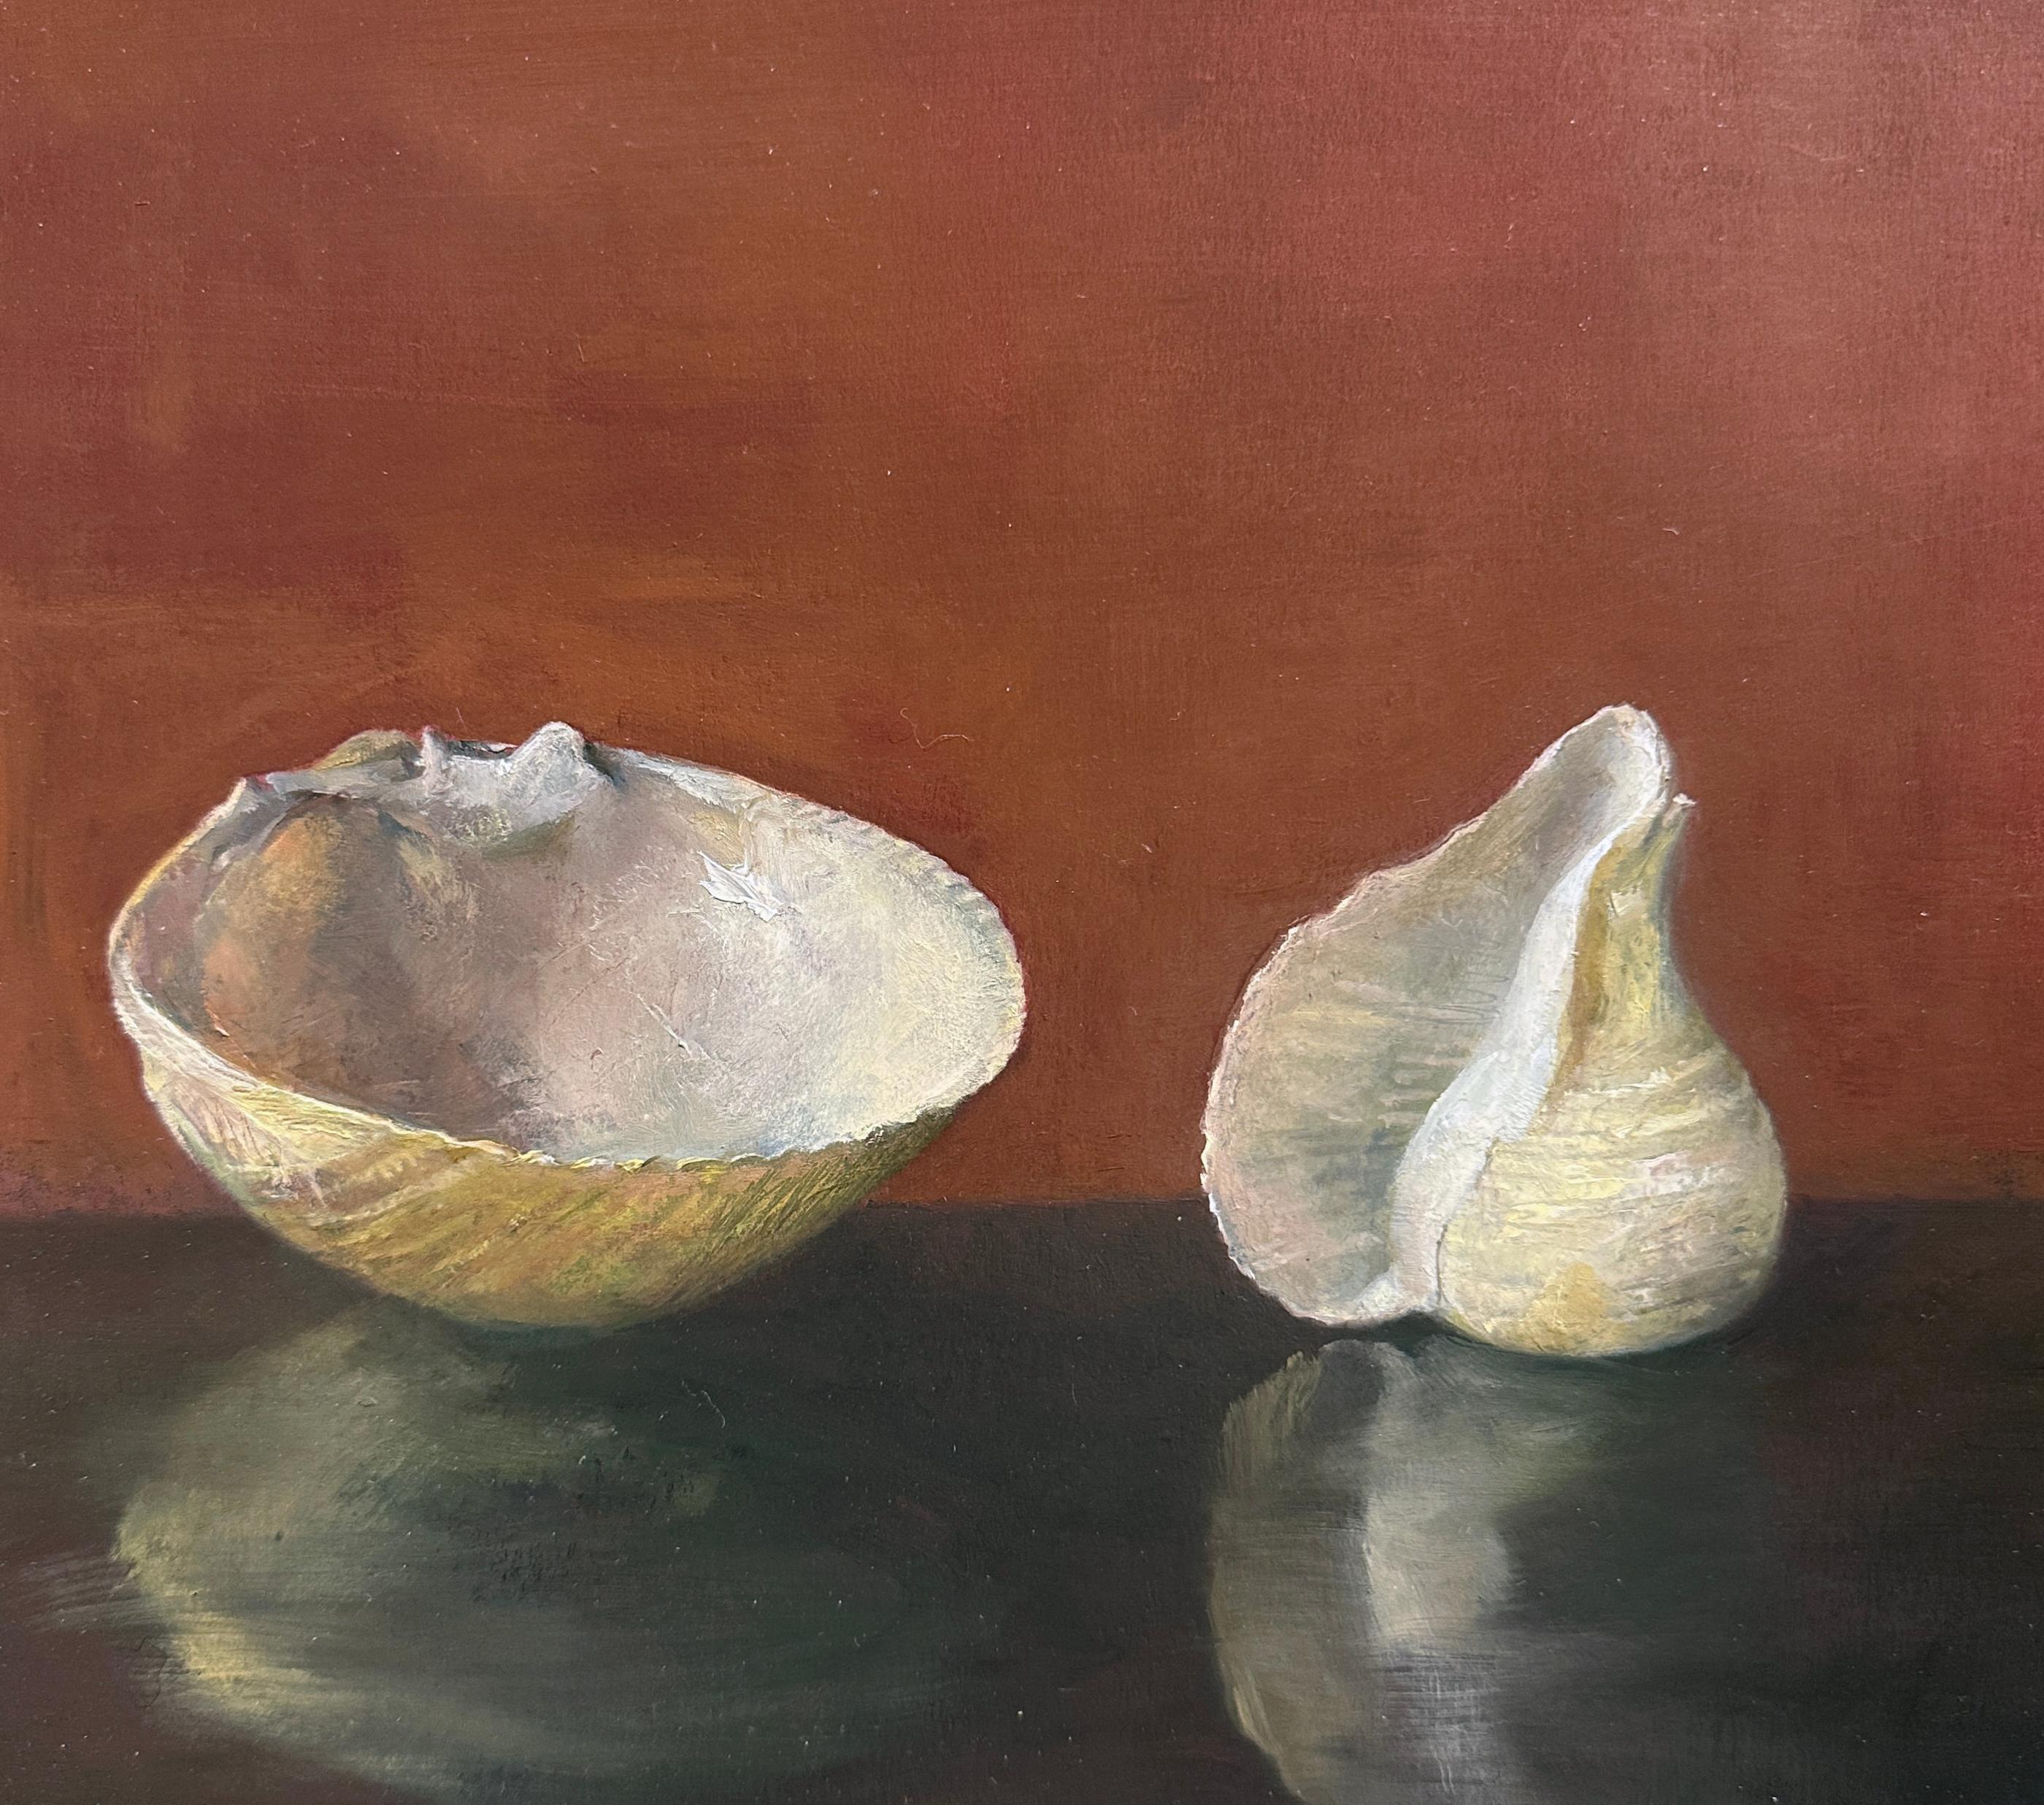 American Clam Shell and Onion Shell, Oil on Panel Still Life Painting with Two Sea Shells